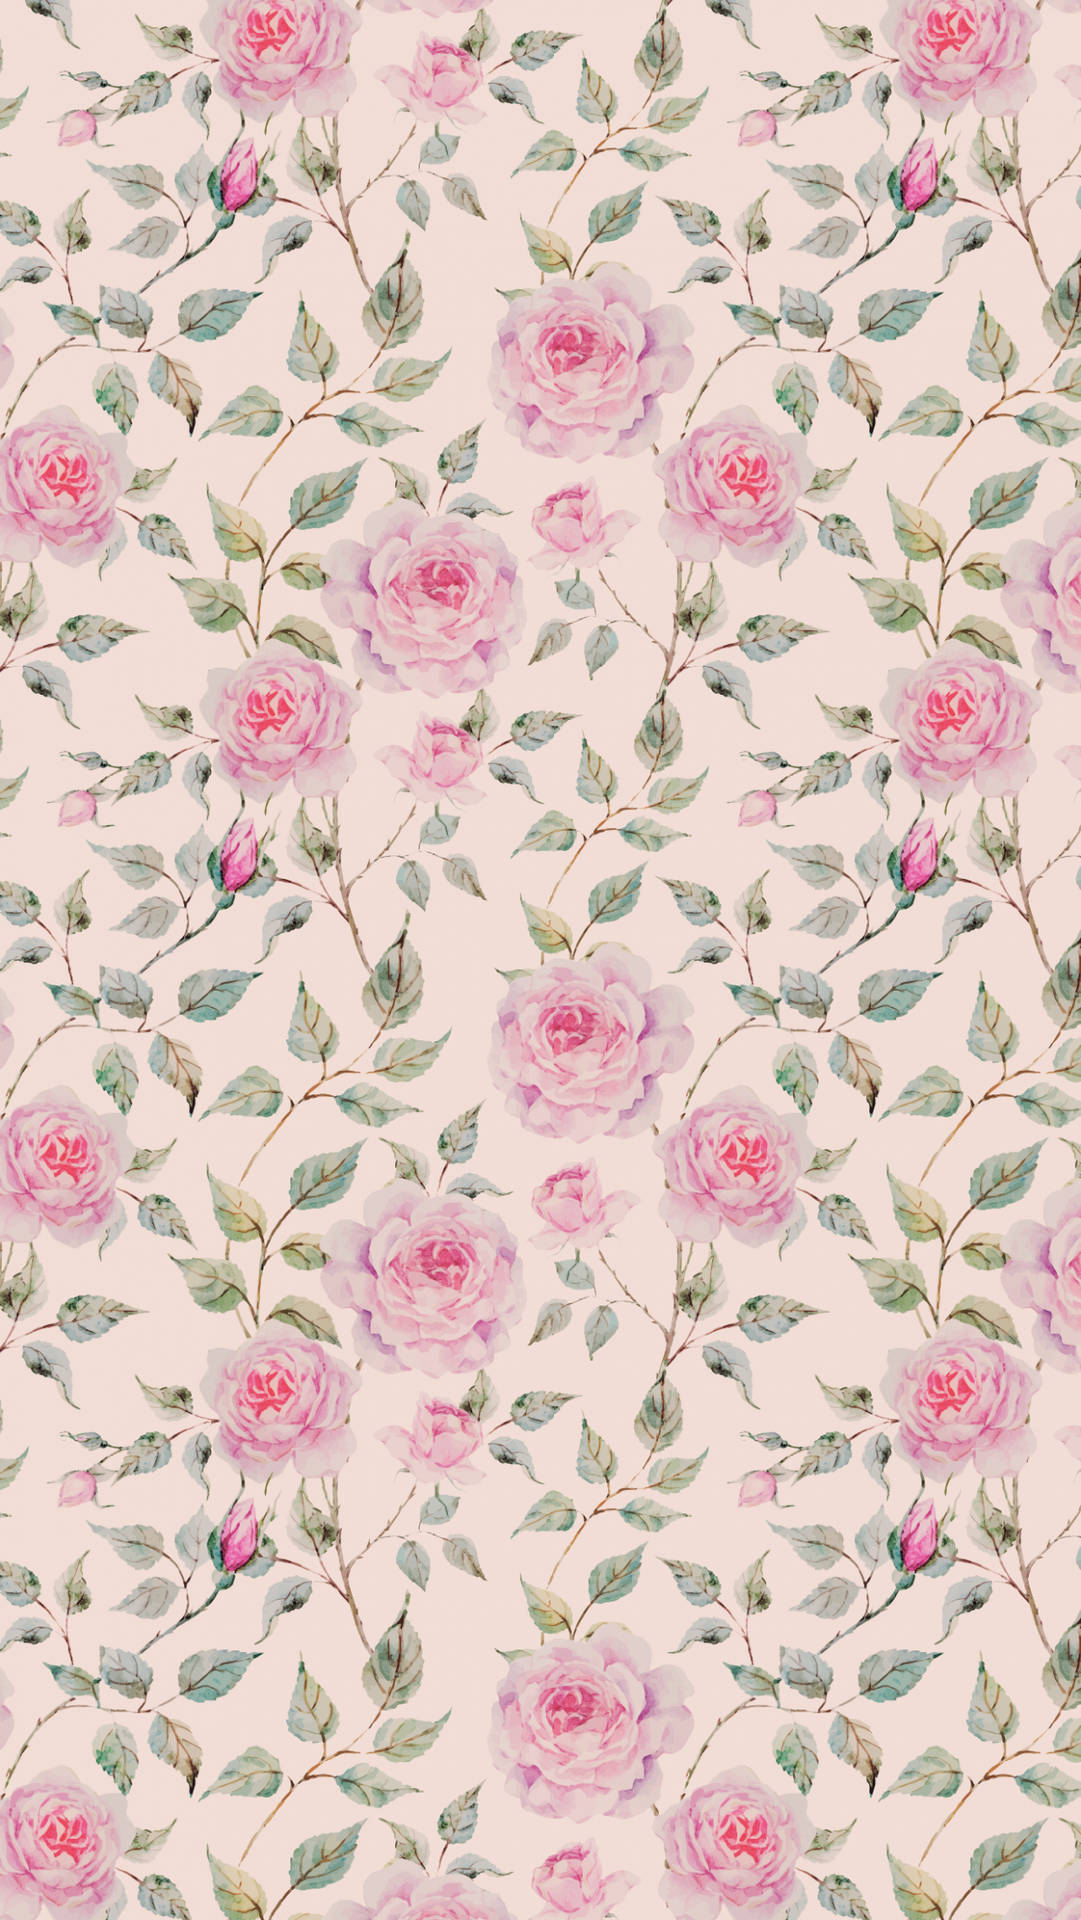 Pink Roses Wallpaper Fabric By Sarah_sass On Spoonflower - Custom Fabric Wallpaper